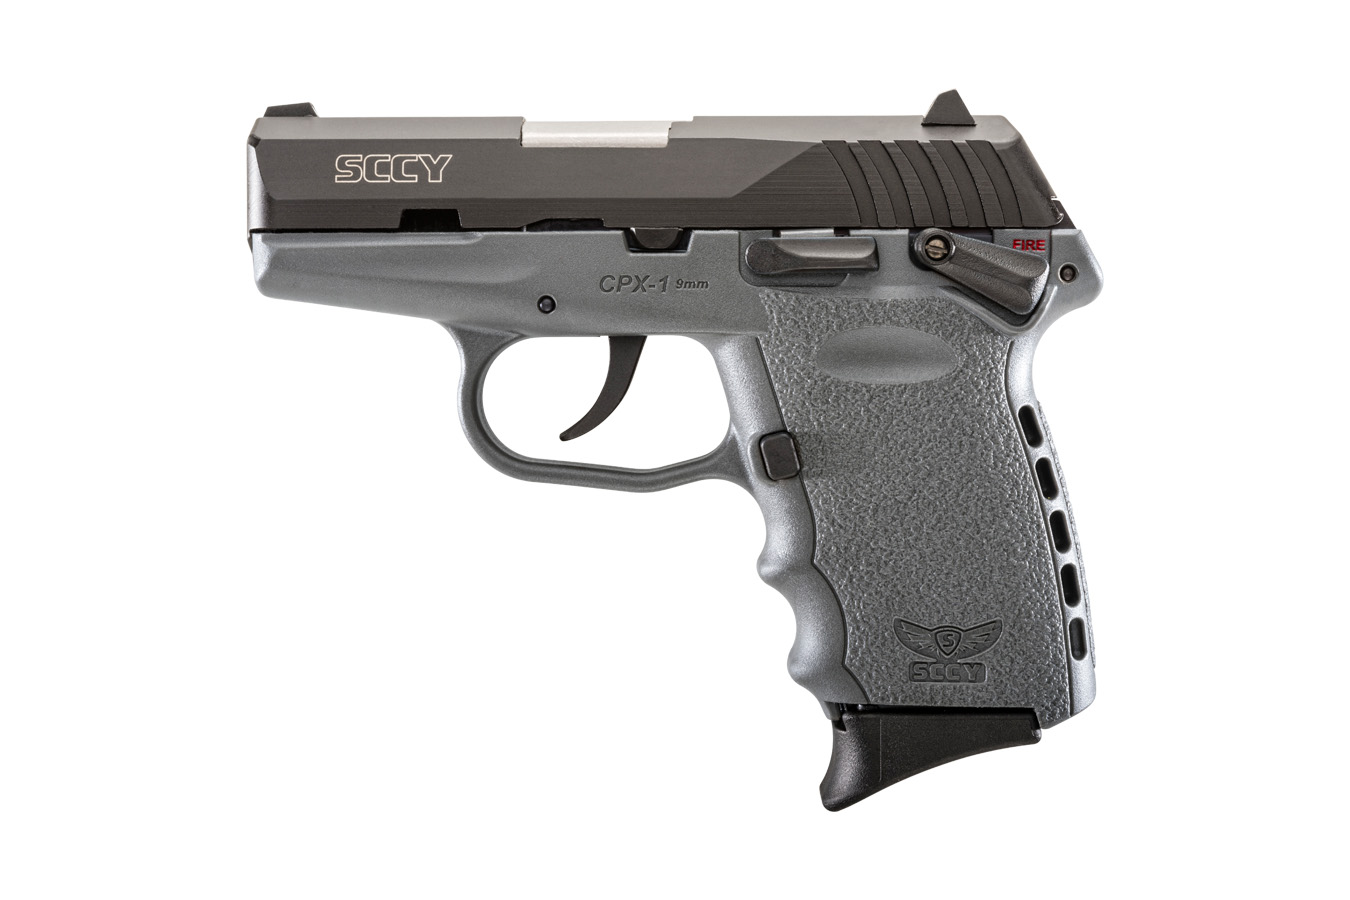 No. 28 Best Selling: SCCY CPX-1 9MM PISTOL WITH SNIPER GRAY FRAME